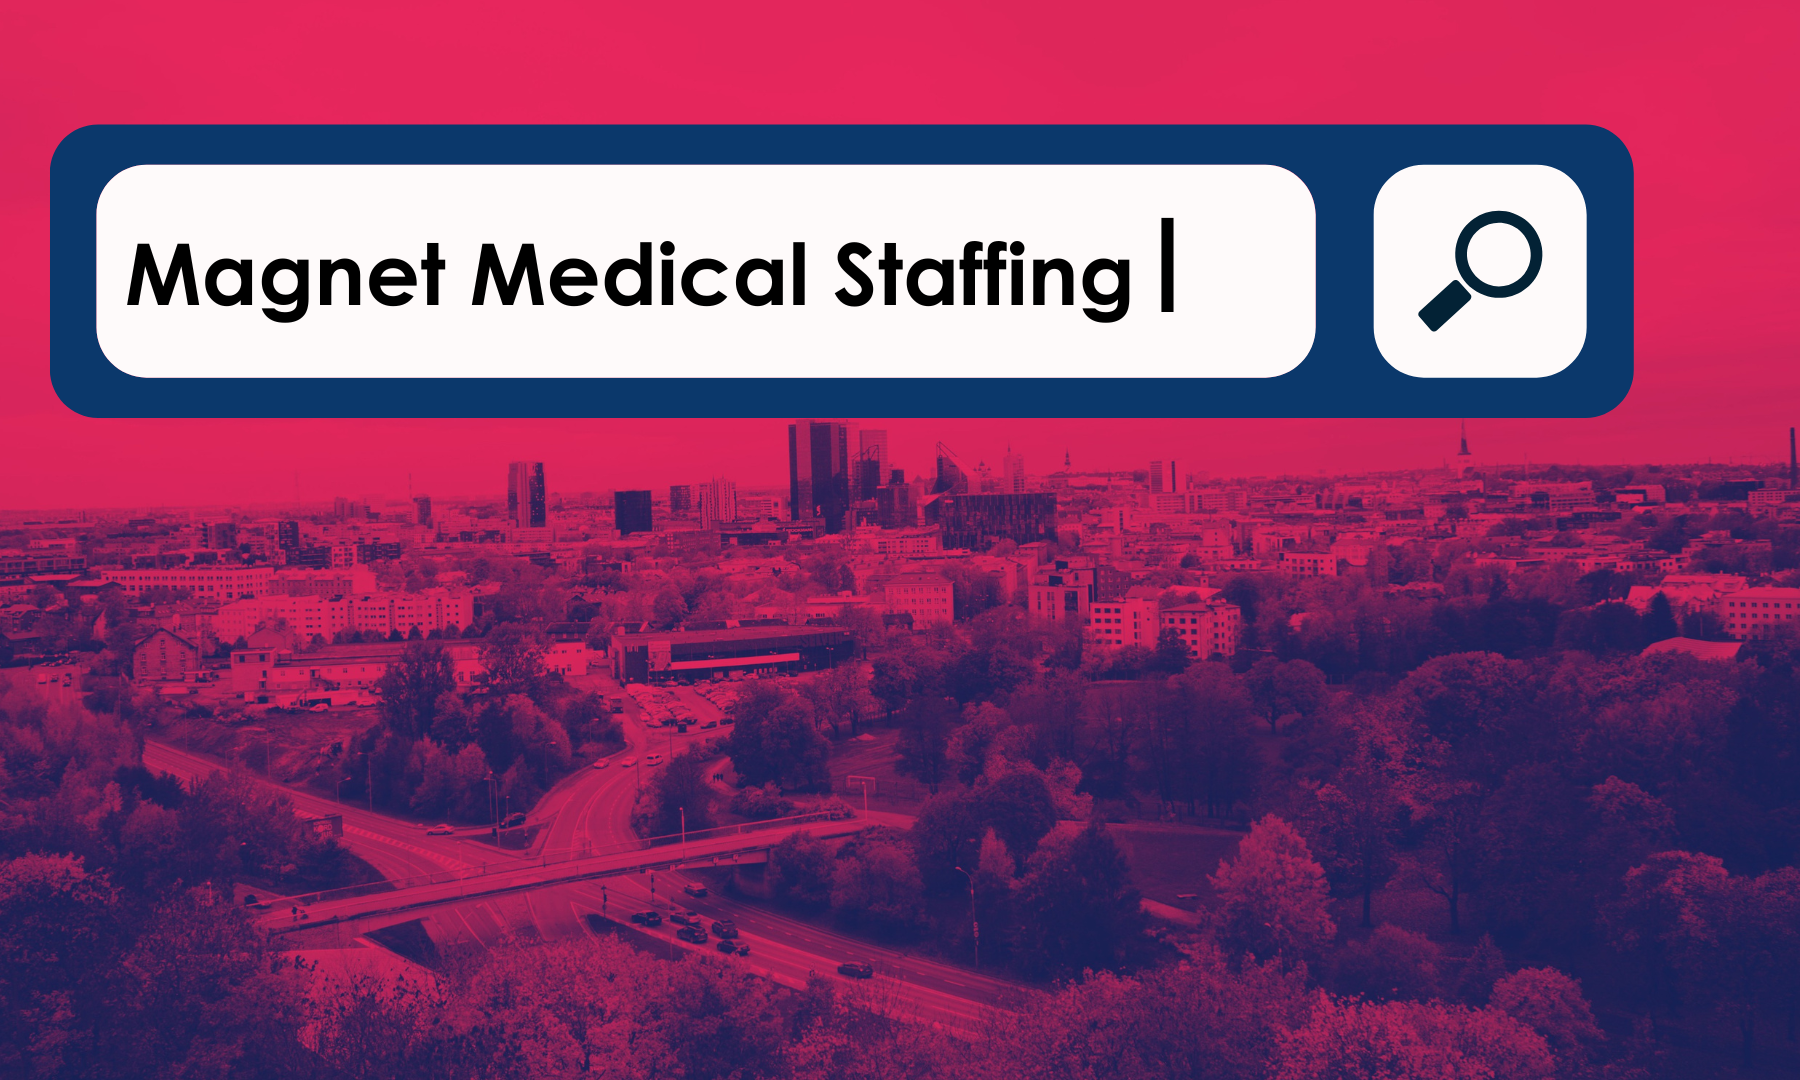 A search bar that someone is using to find out more about Magnet Medical Staffing